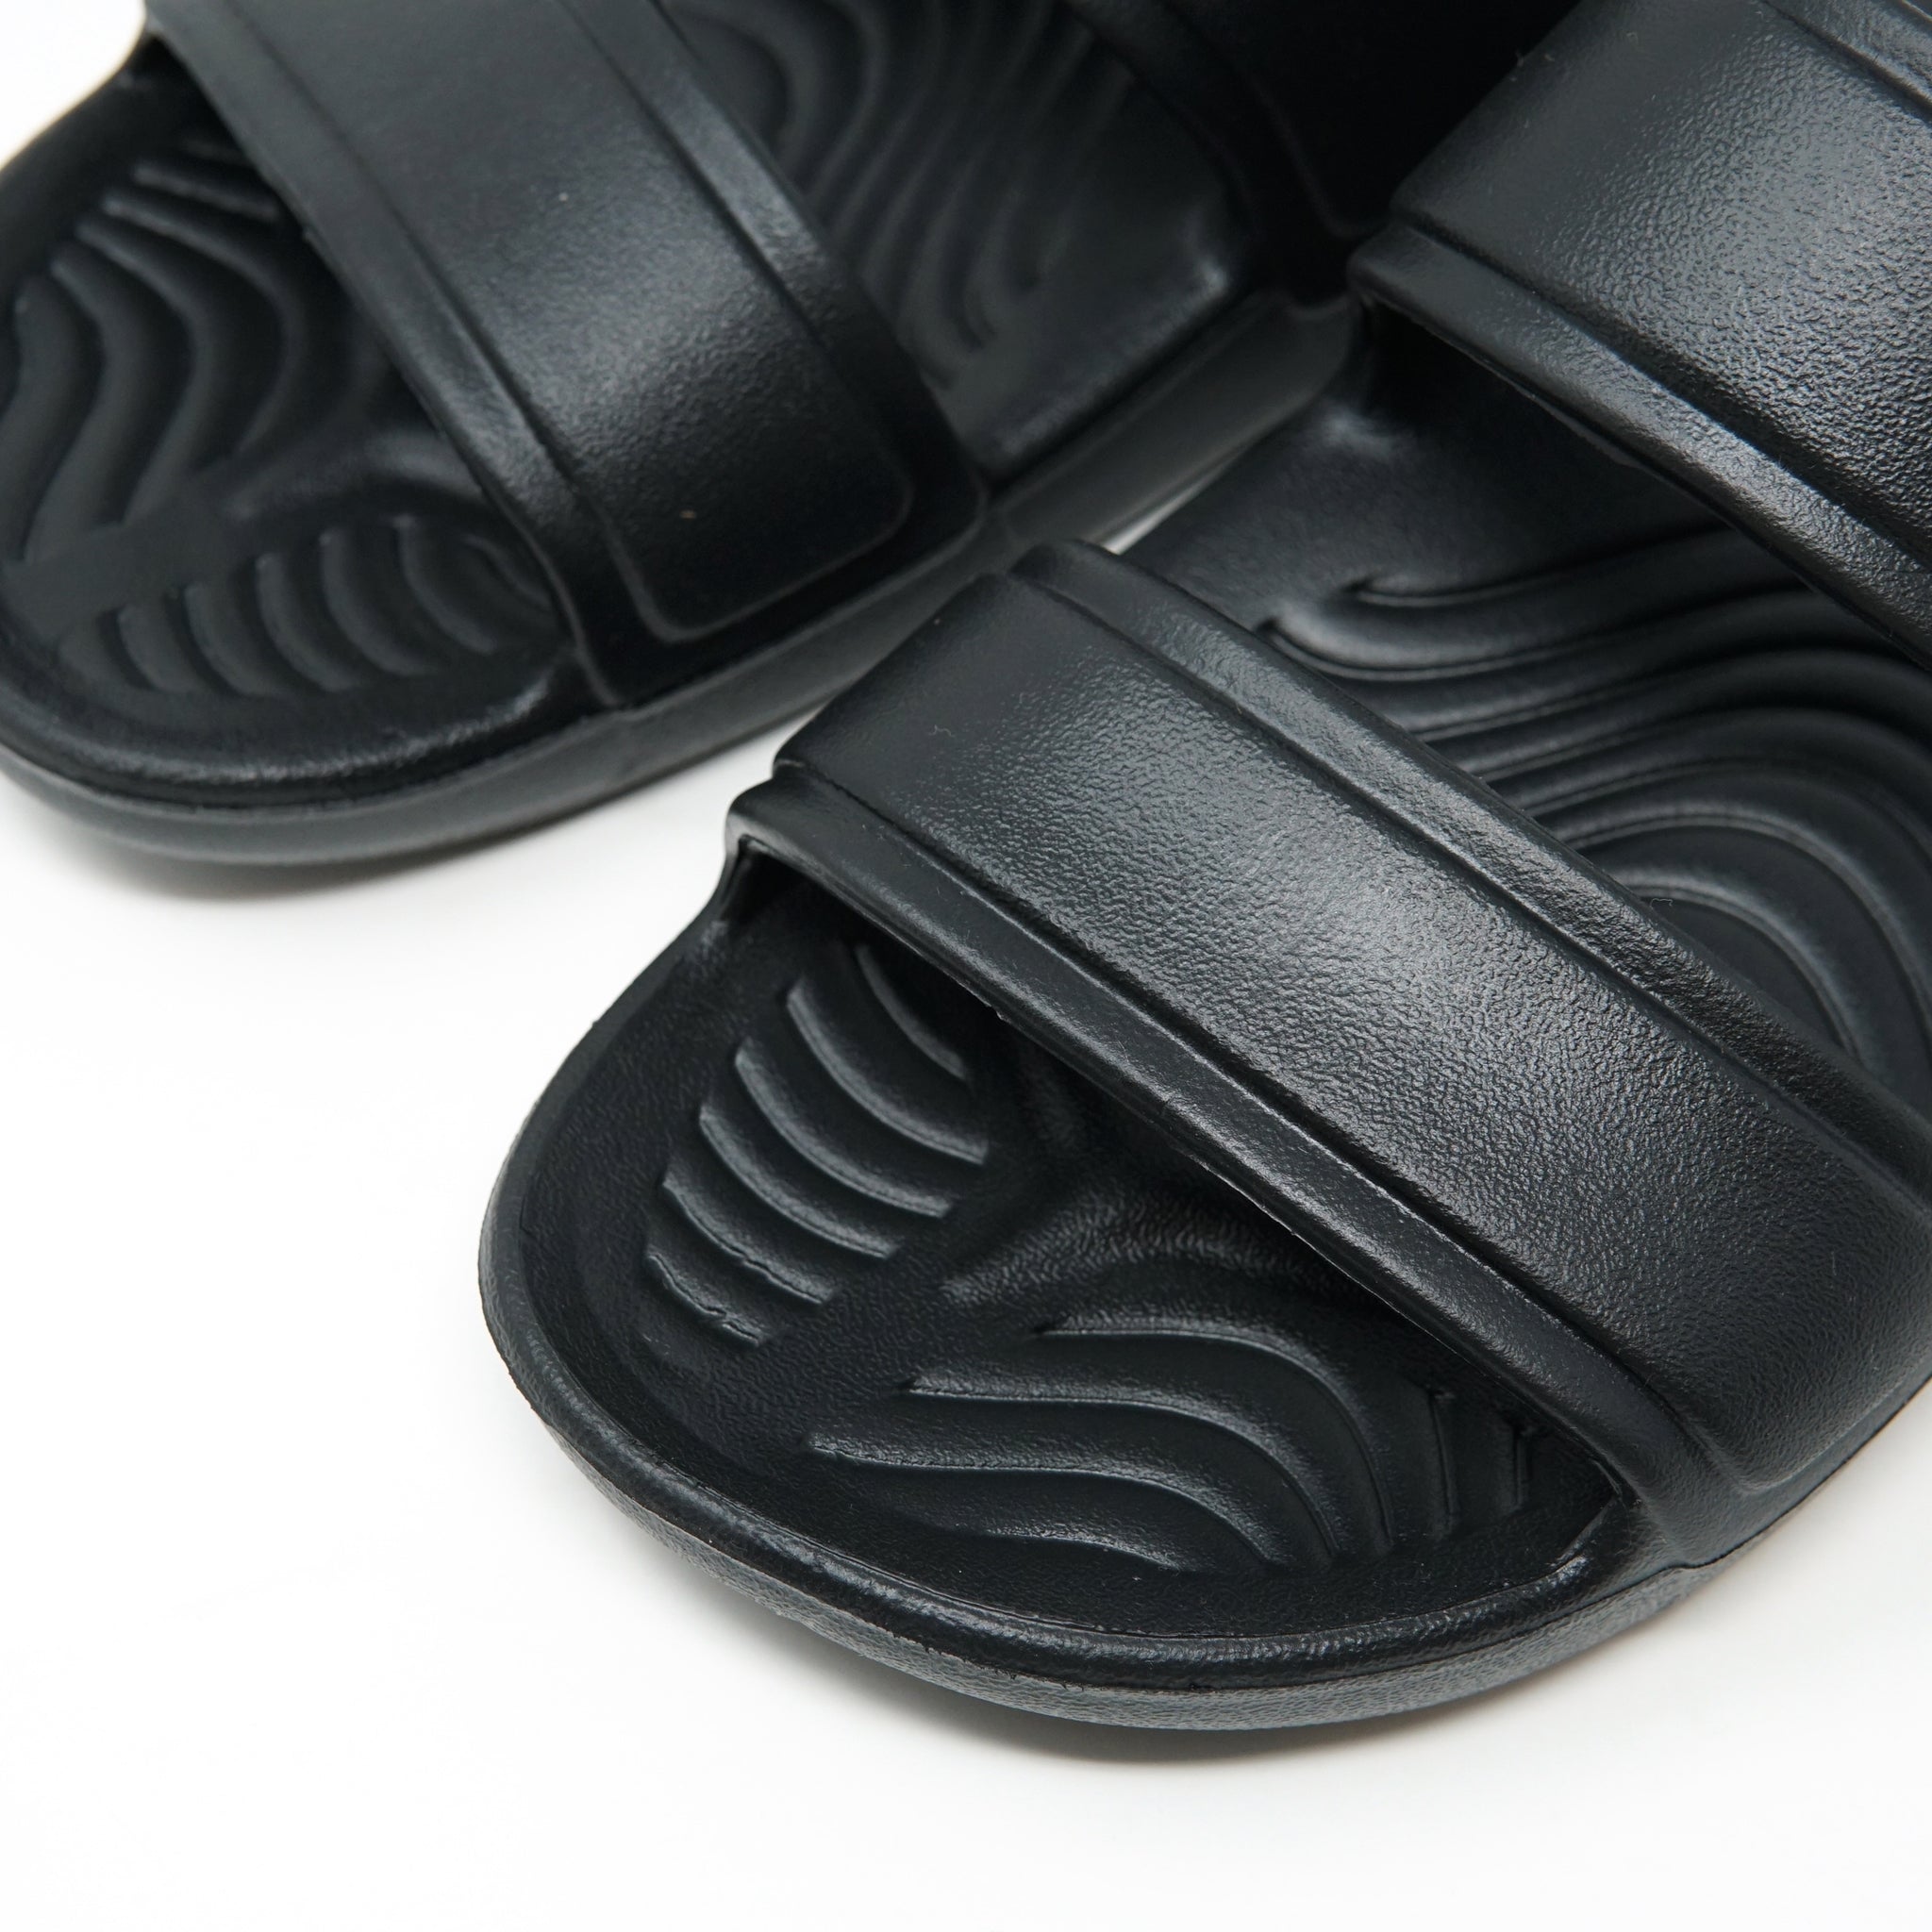 Name:One Comfortble Two Strap | Color:Black | Size : 8/9/10 |【American mart steppers】